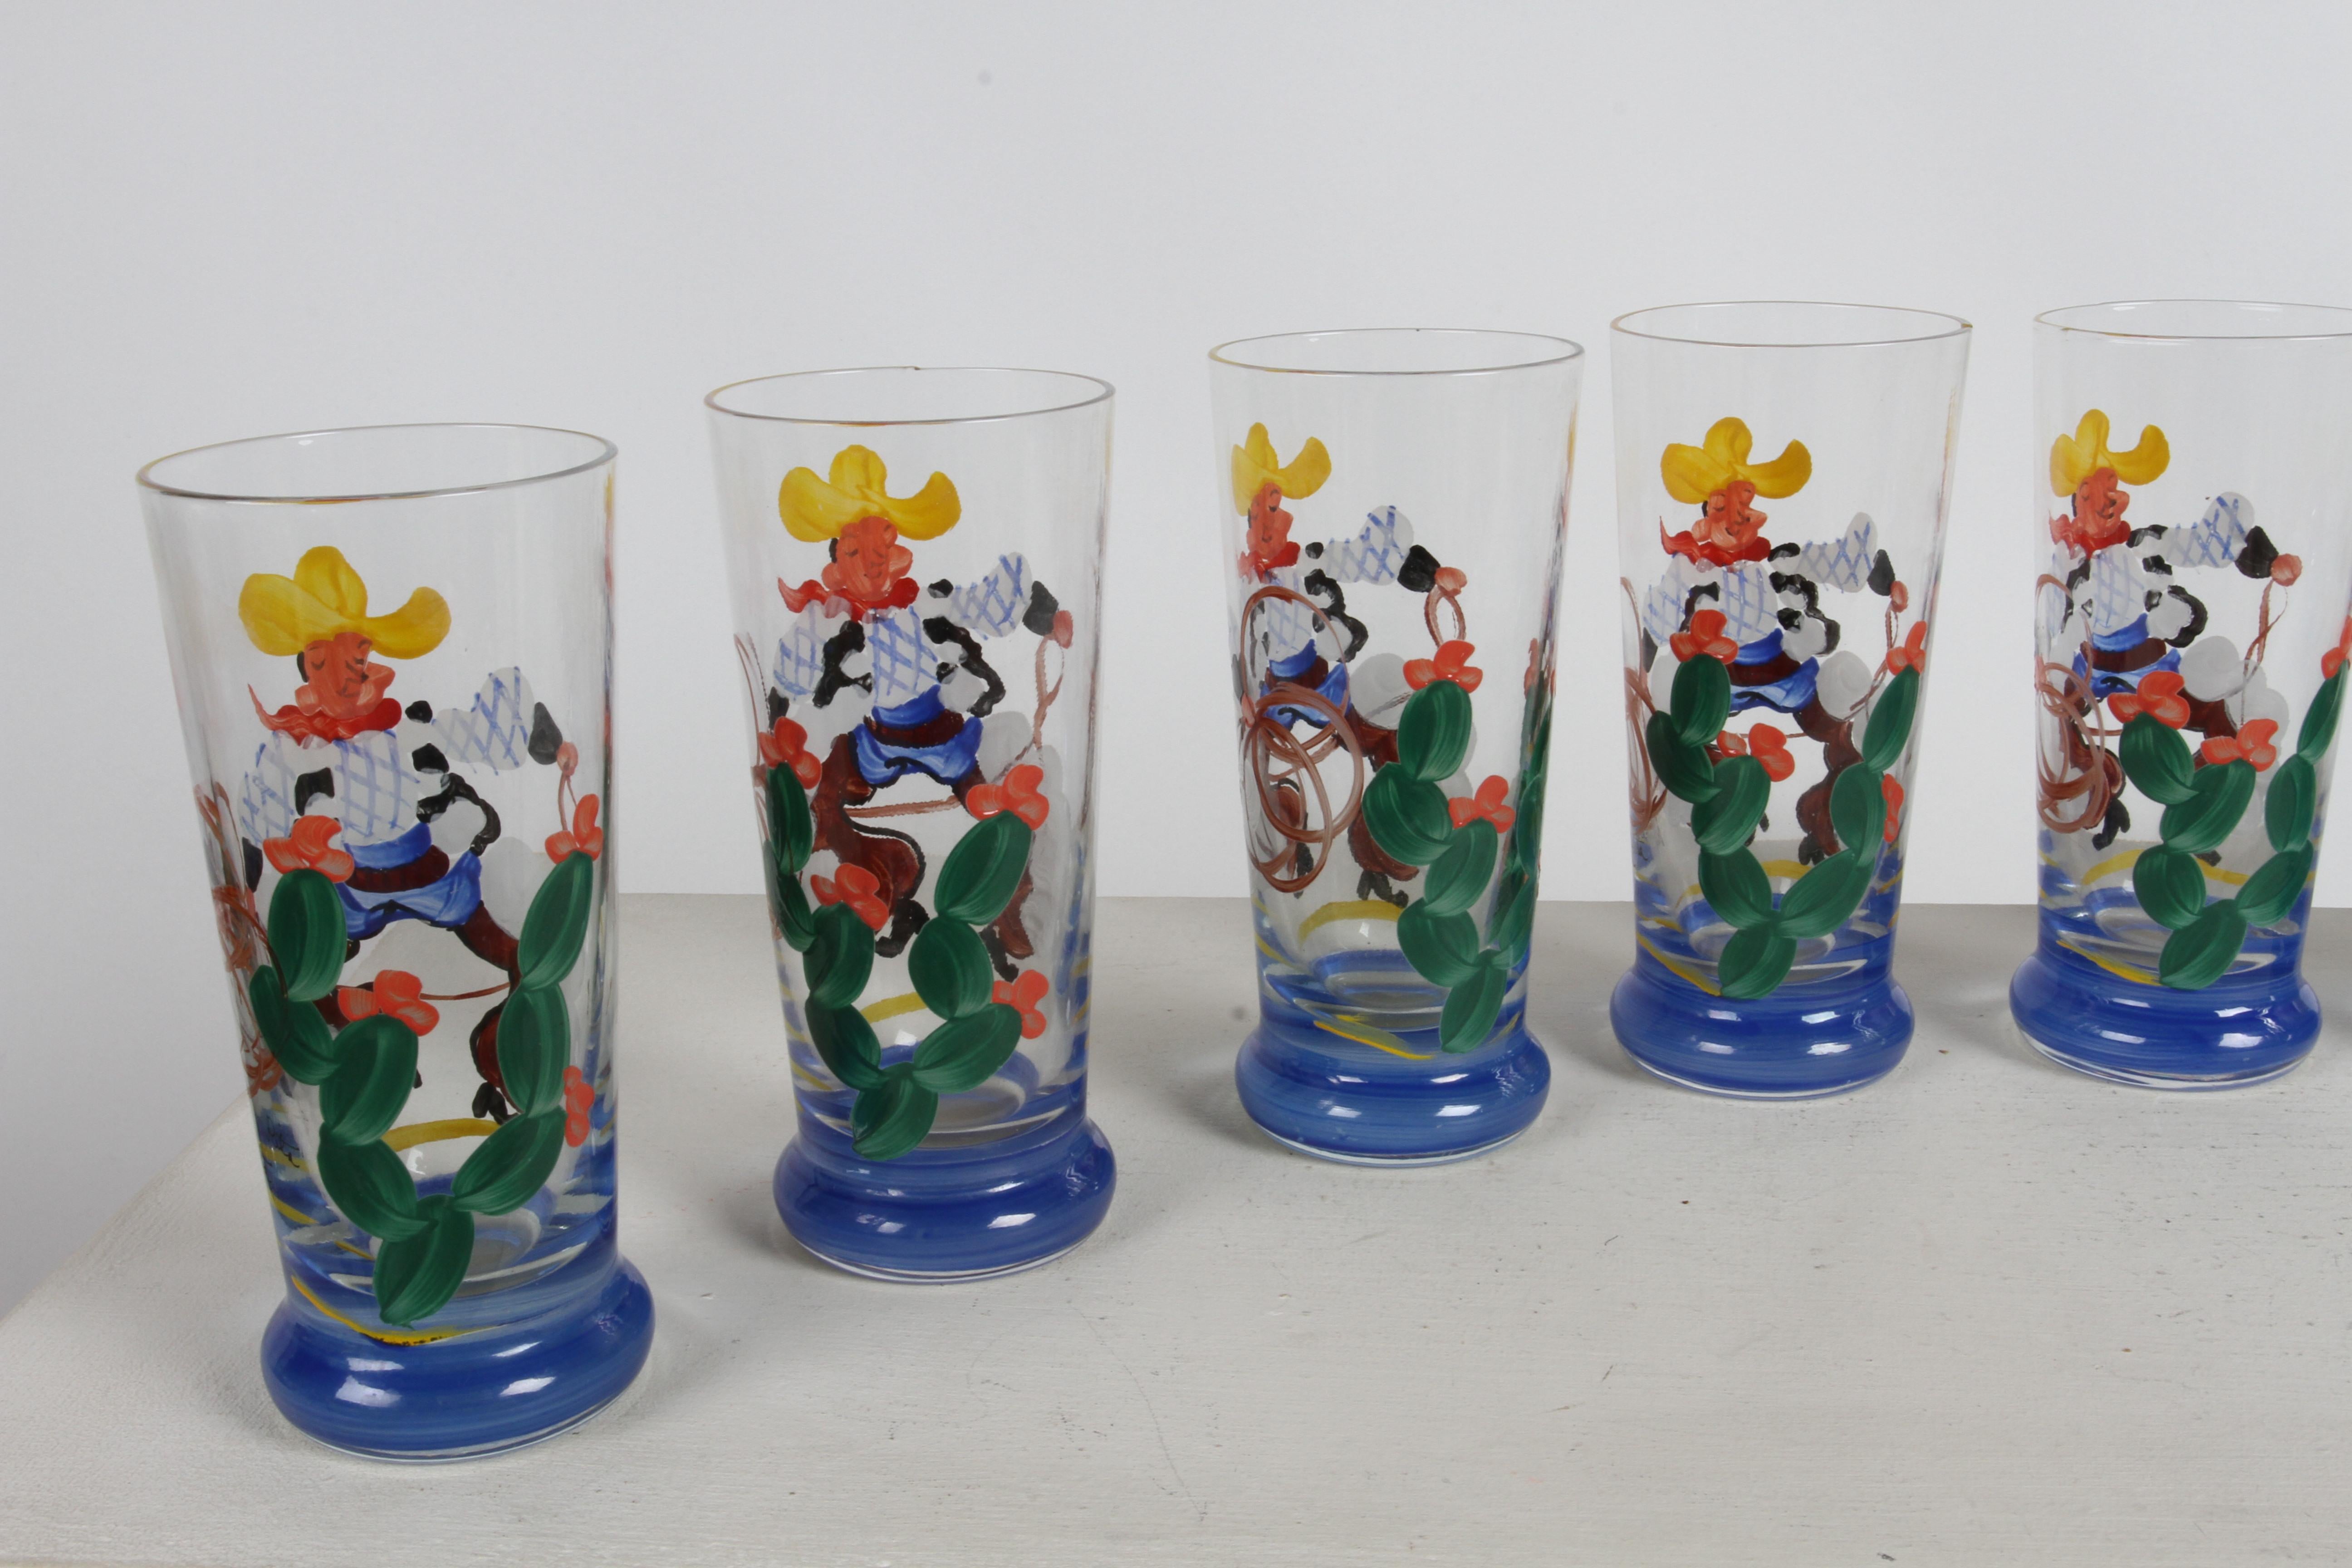 Native American 1940s Artist Hand-Painted Bar Glasses with Cowboy, Lasso & Cactus Theme - Rita  For Sale